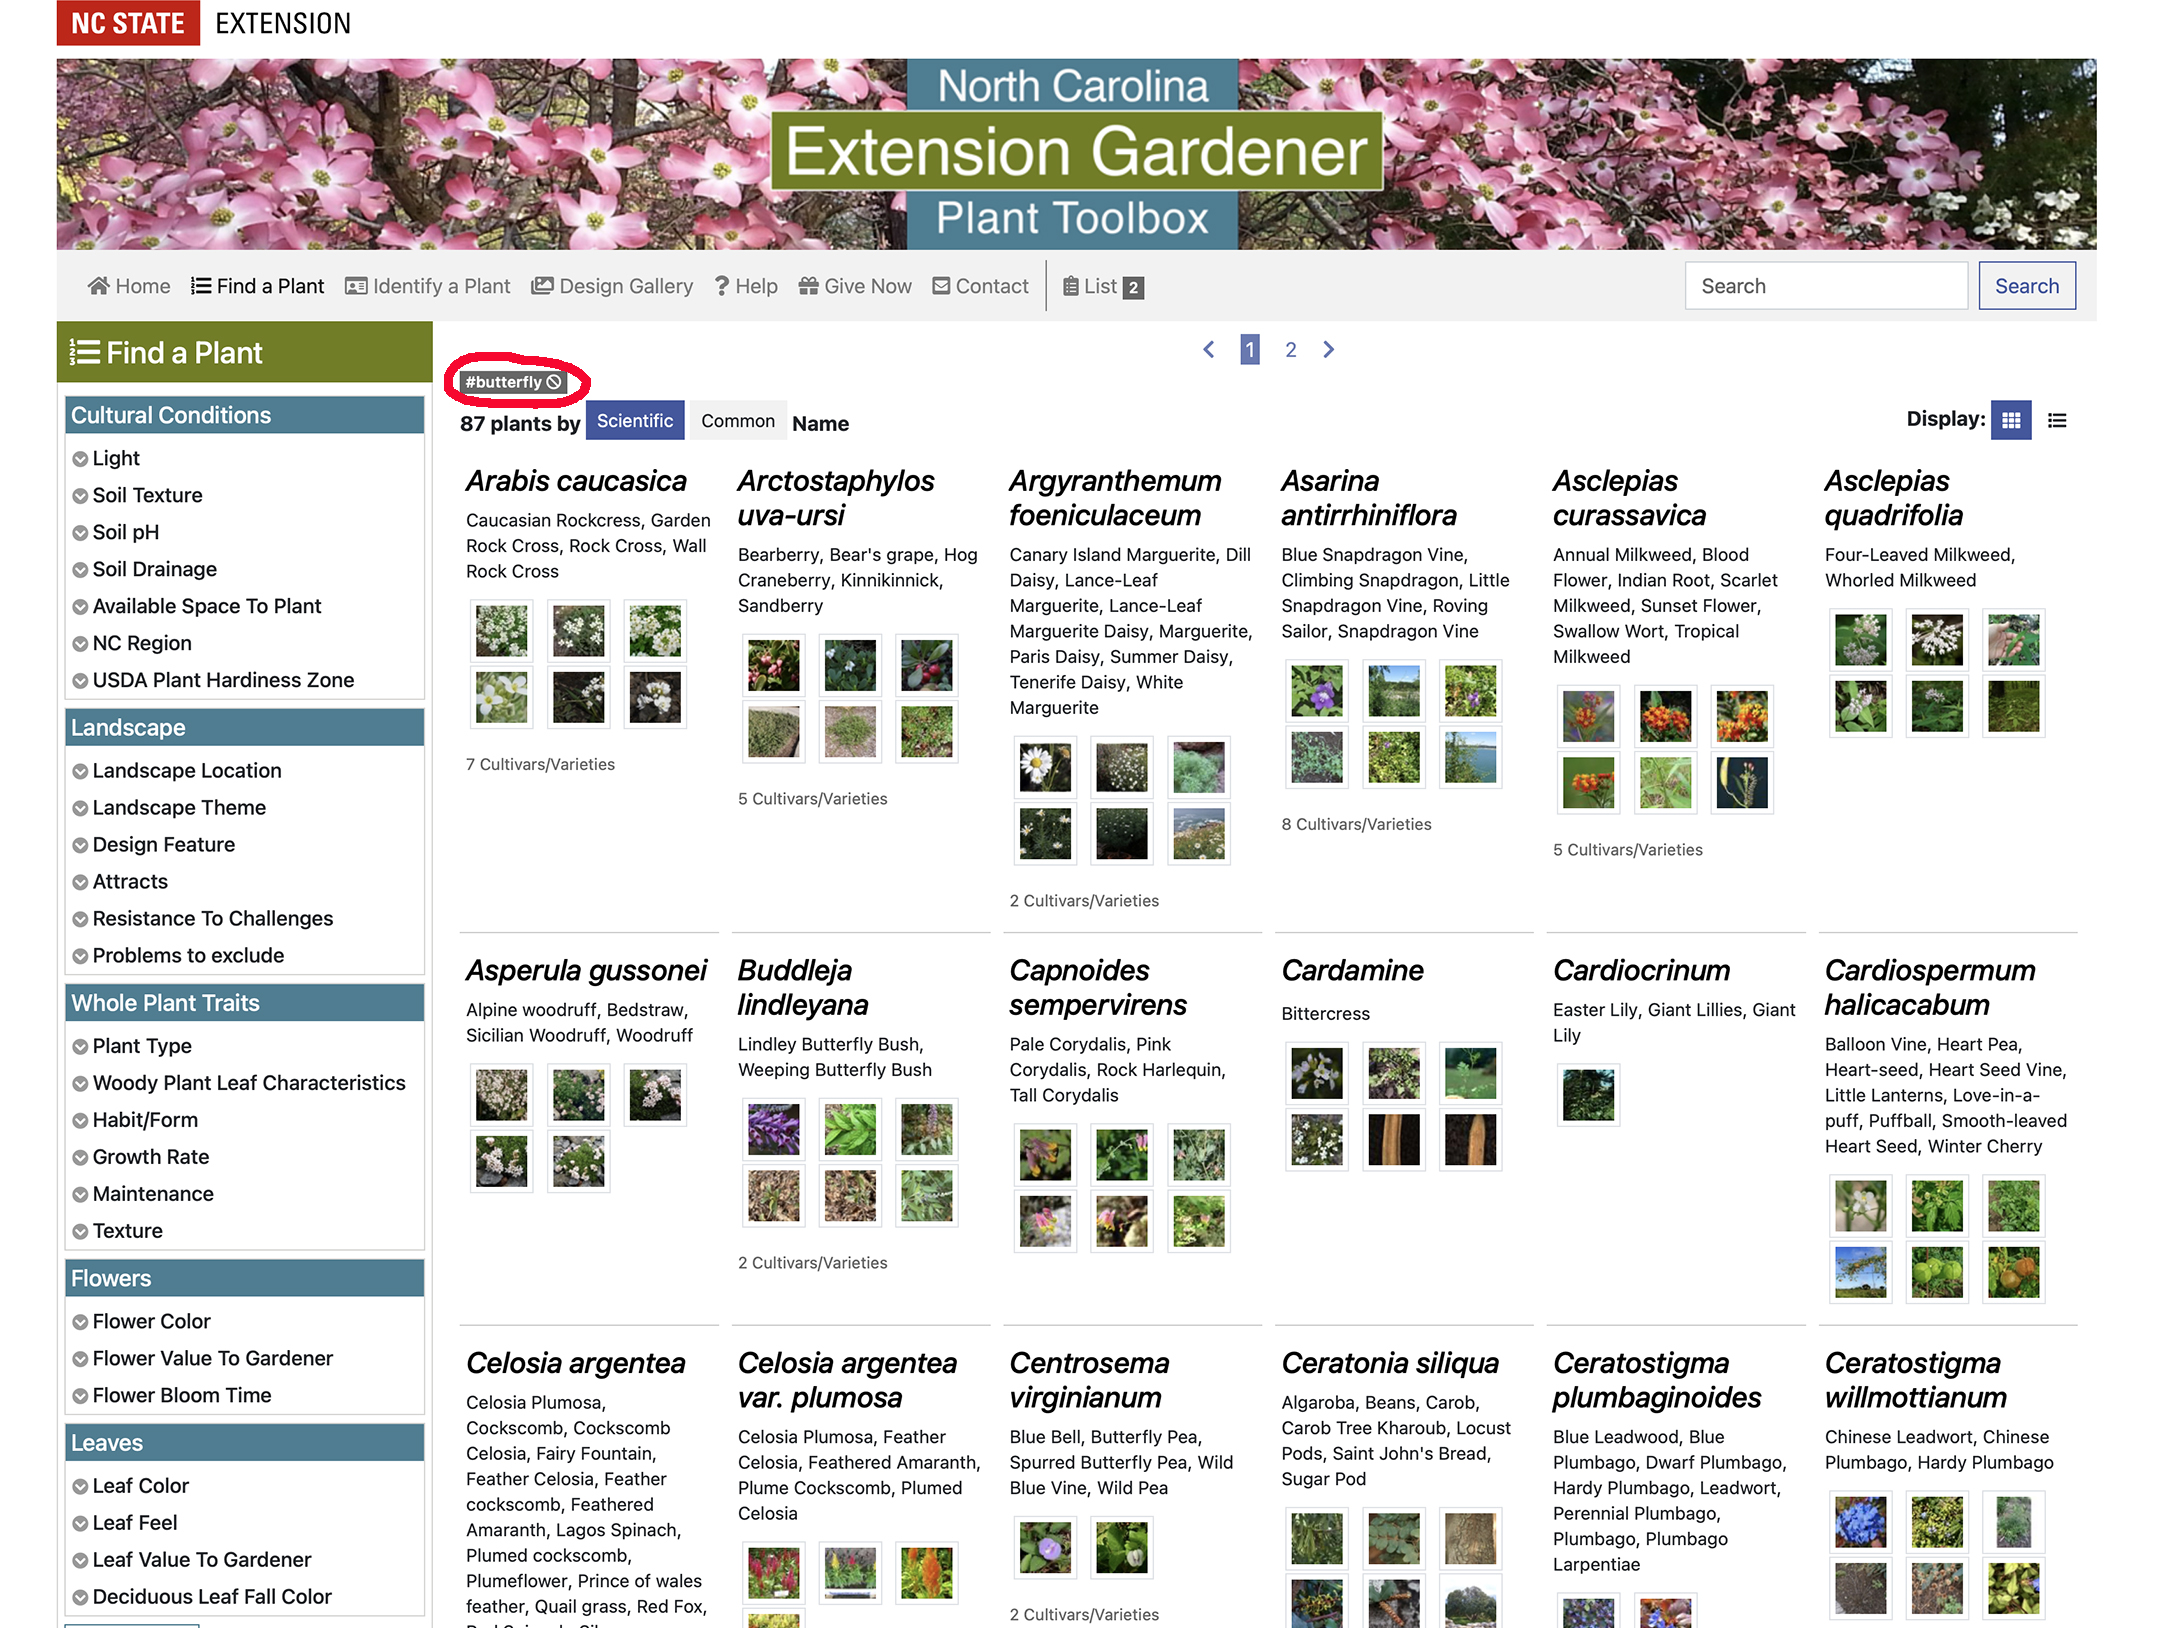 Page view of plants tagged "butterfly" with the tag circled in the upper left.